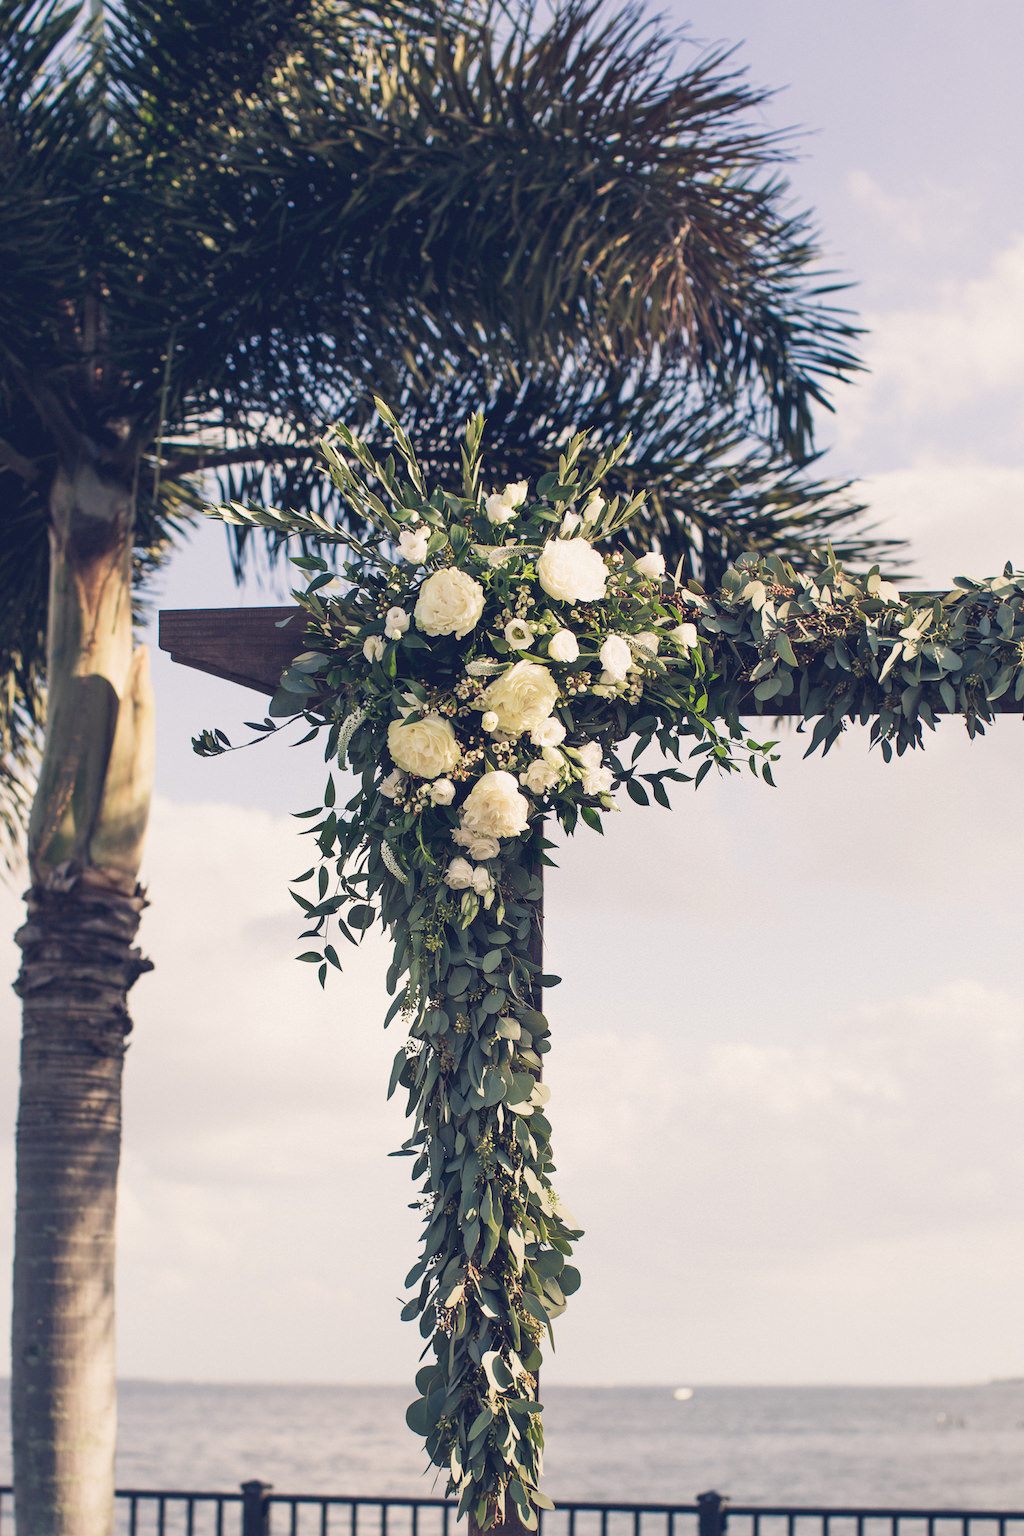 Rustic Chic, Tampa Bay Outdoor Garden Wedding Ceremony Decor Eucalyptus Leaves, White Roses, Greenery Floral Arch | Florida Wedding Photographer Luxe Light Images